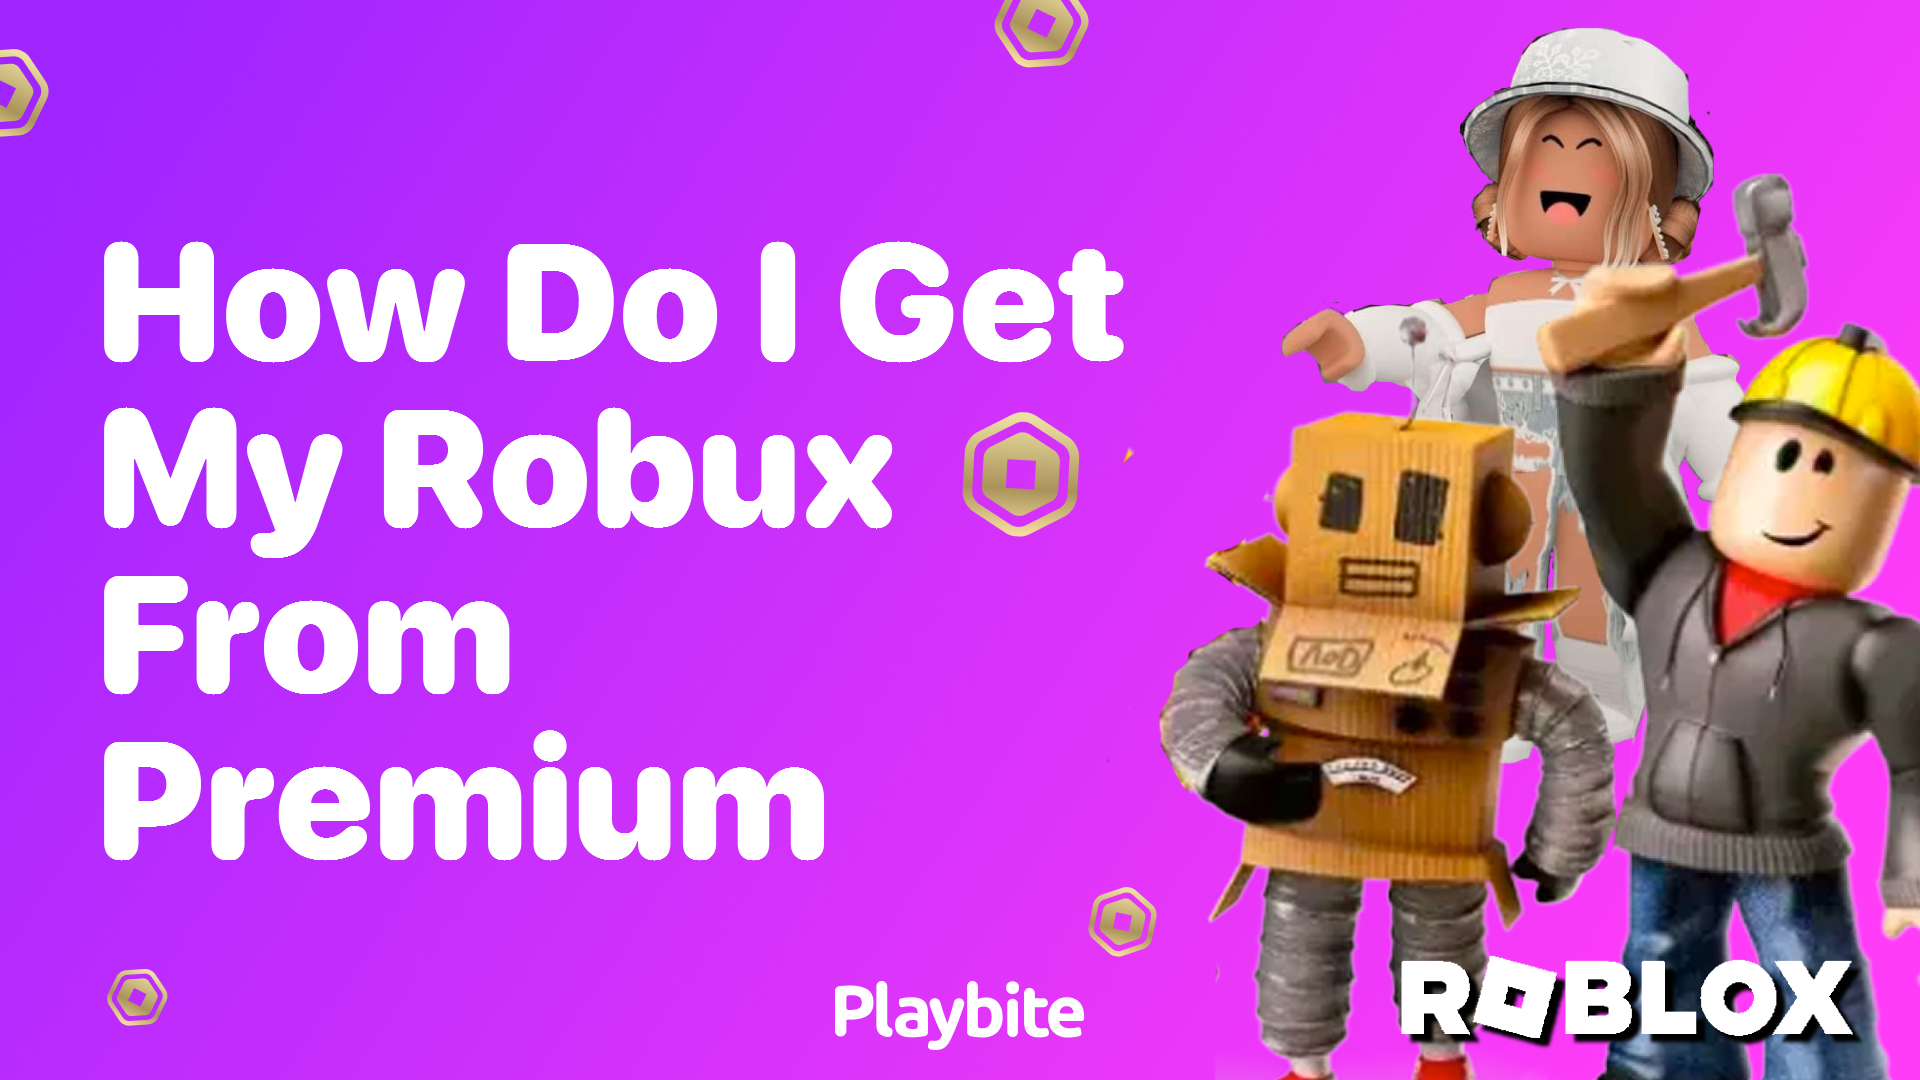 How Do I Get My Robux From Premium?